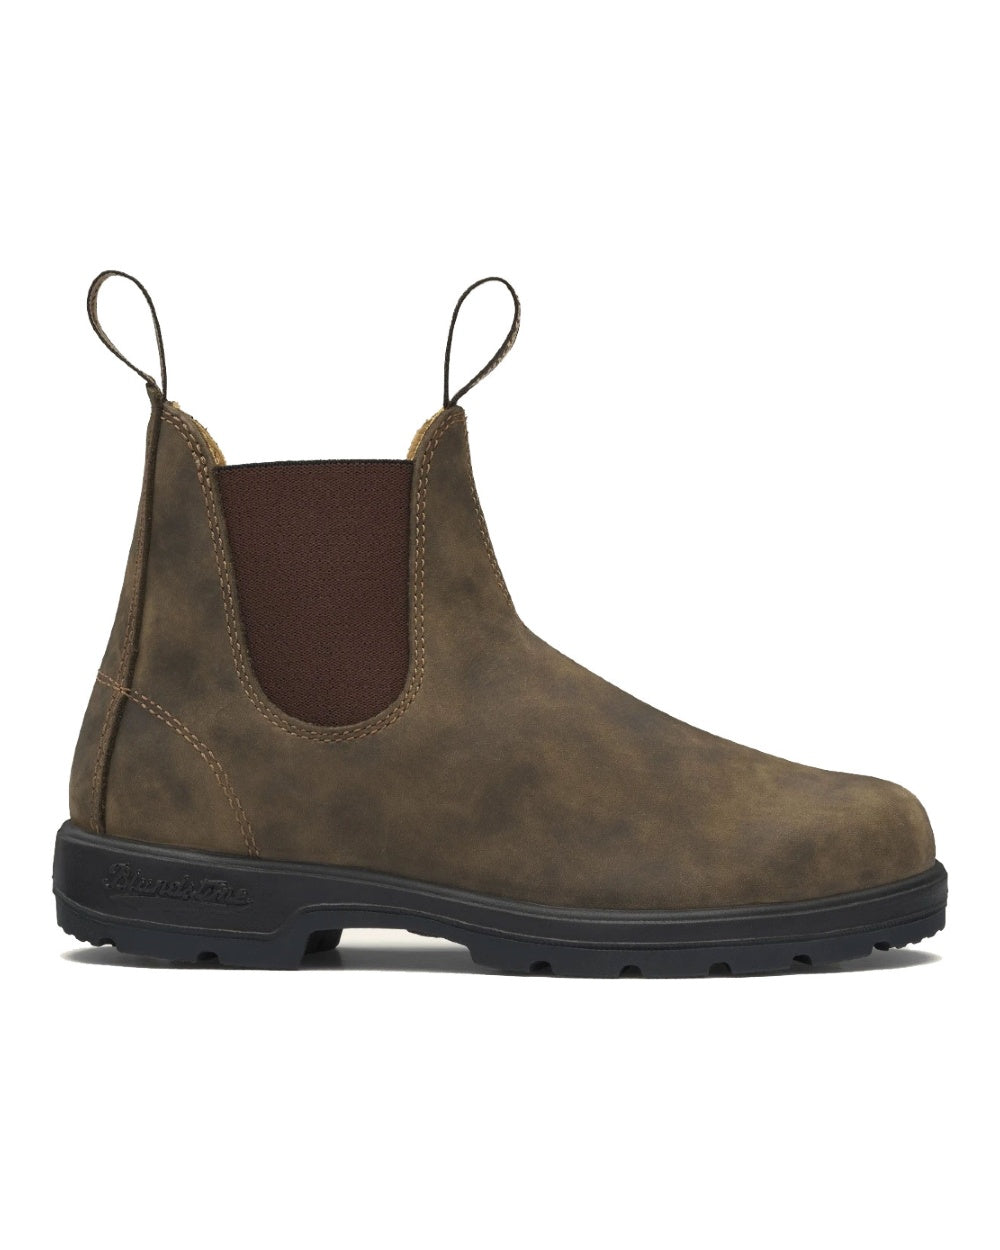 Dealer and Chelsea Boots | Men's and Women's Styles